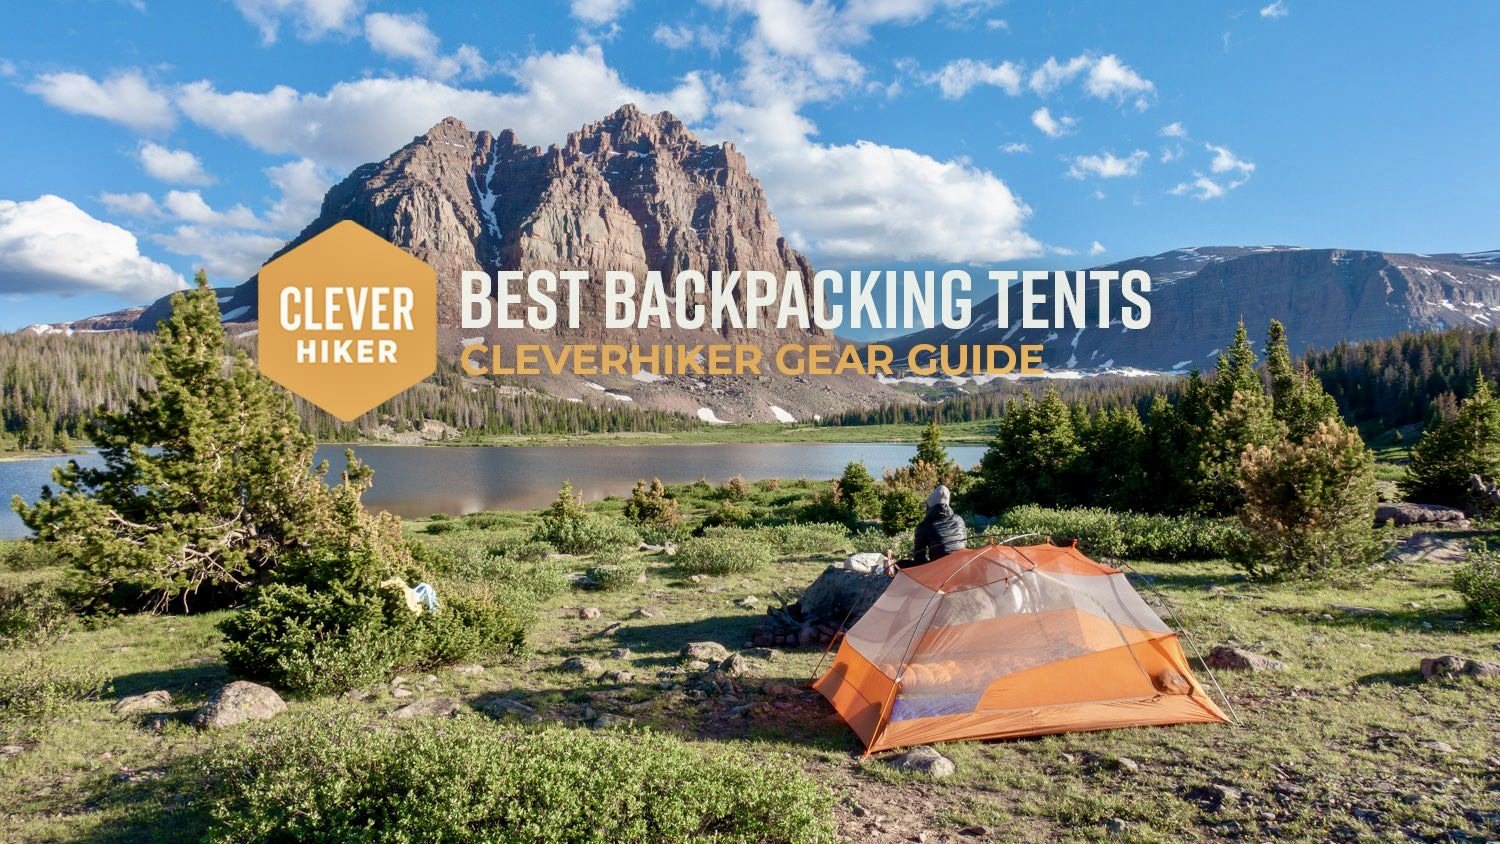 The Benefits of Investing in Quality Outdoor Gear: A Wise Decision.